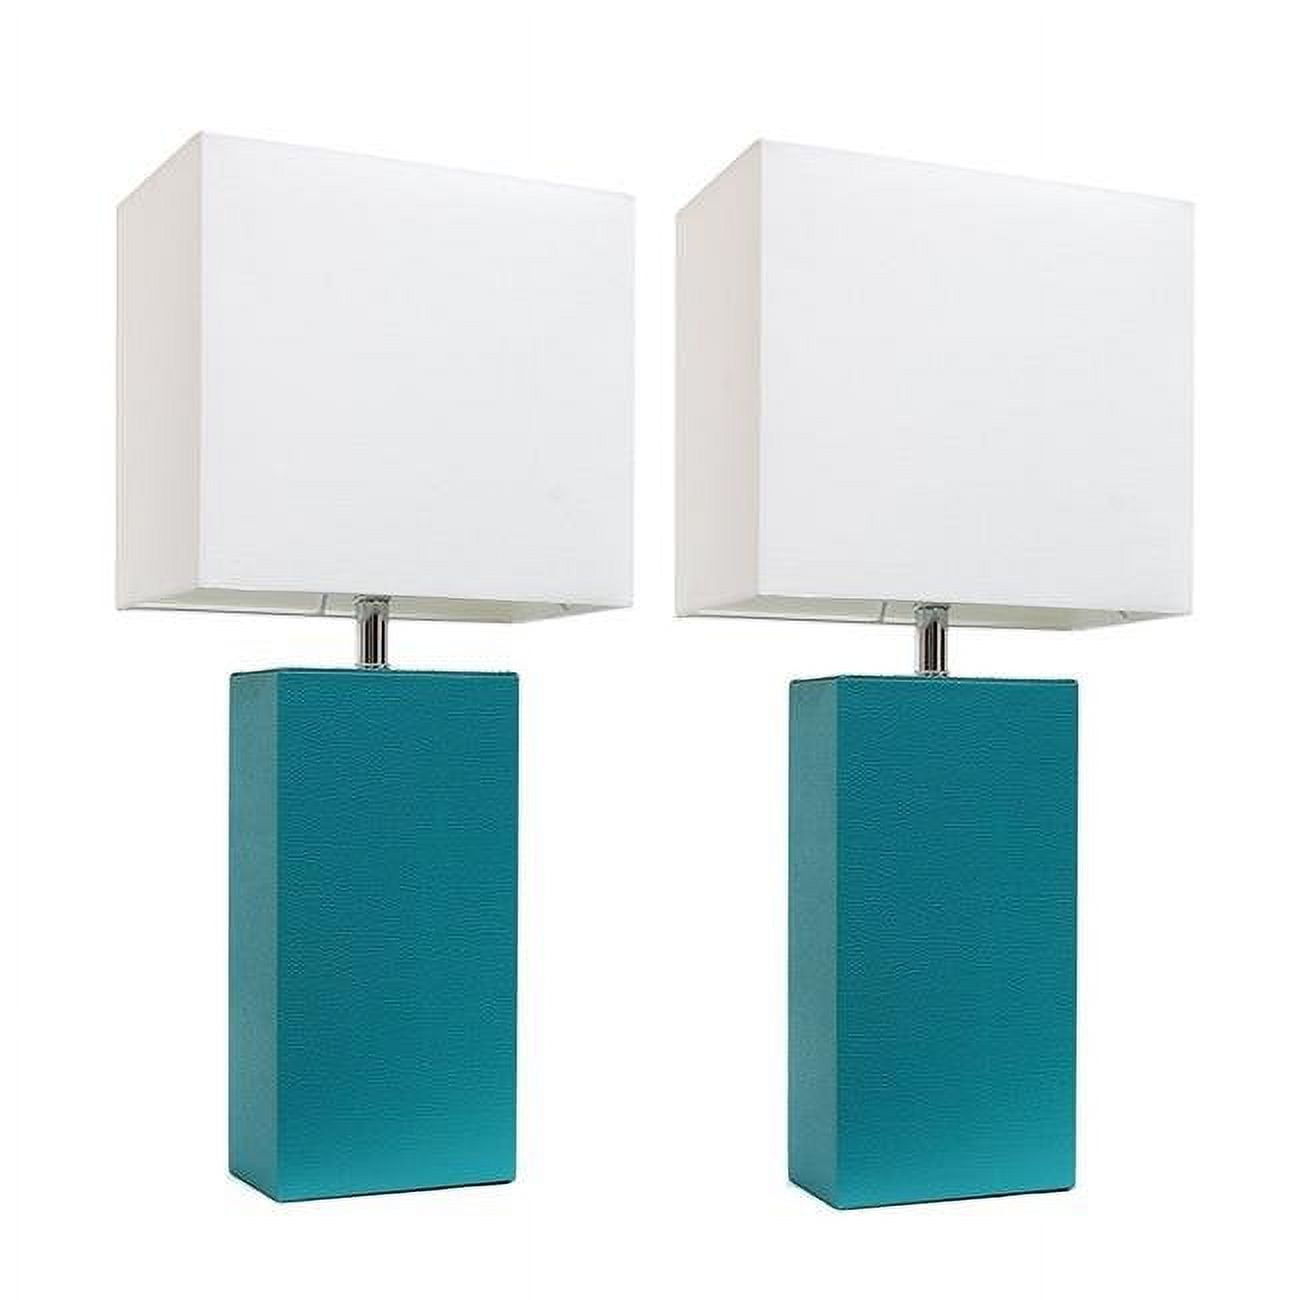 Alltherages Lc2000-tel-2pk Elegant Designs Modern Leather Table Lamp With White Fabric Shade - Teal, Pack Of 2